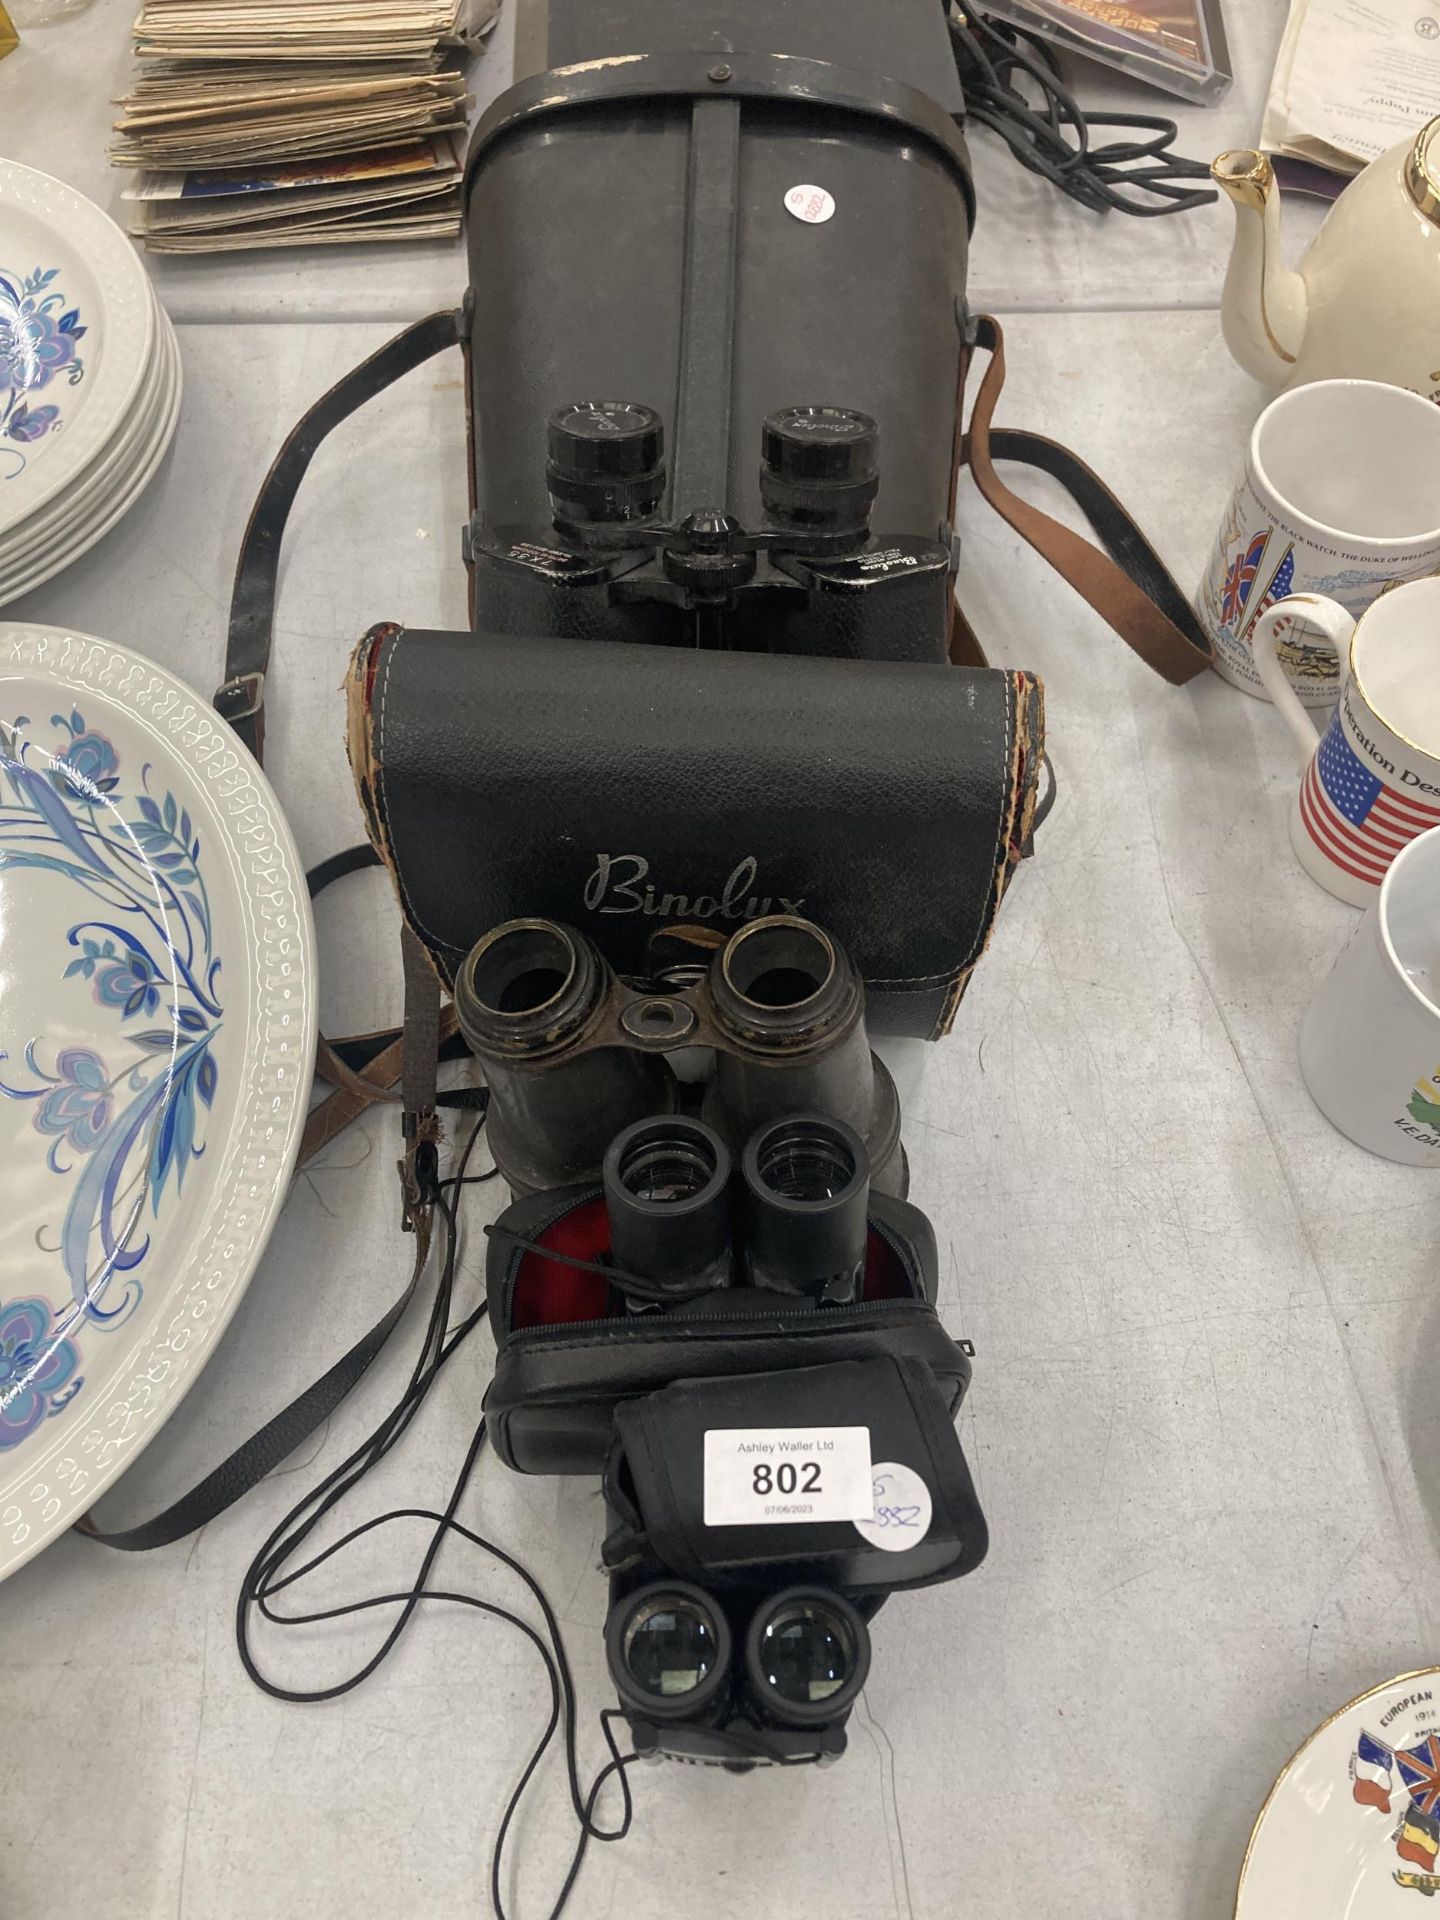 FOUR PAIRS OF BINOCULARS IN CASES TO INCLUDE BINOLUX - ONE PAIR A/F